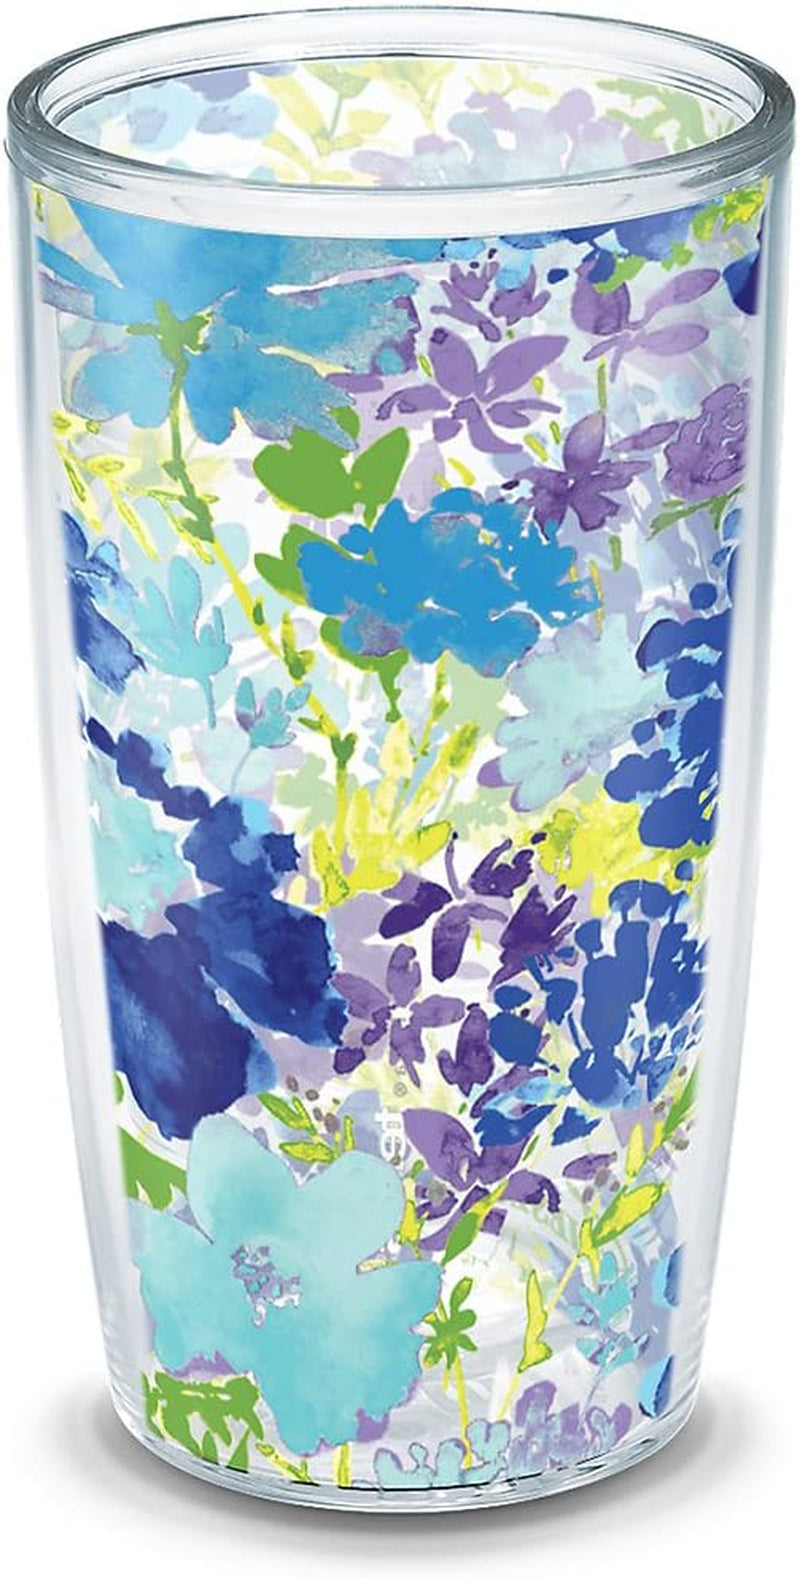 Tervis Made in USA Double Walled Fiesta Insulated Tumbler Cup Keeps Drinks Cold & Hot, 16Oz Mug - Purple Lid, Purple Floral